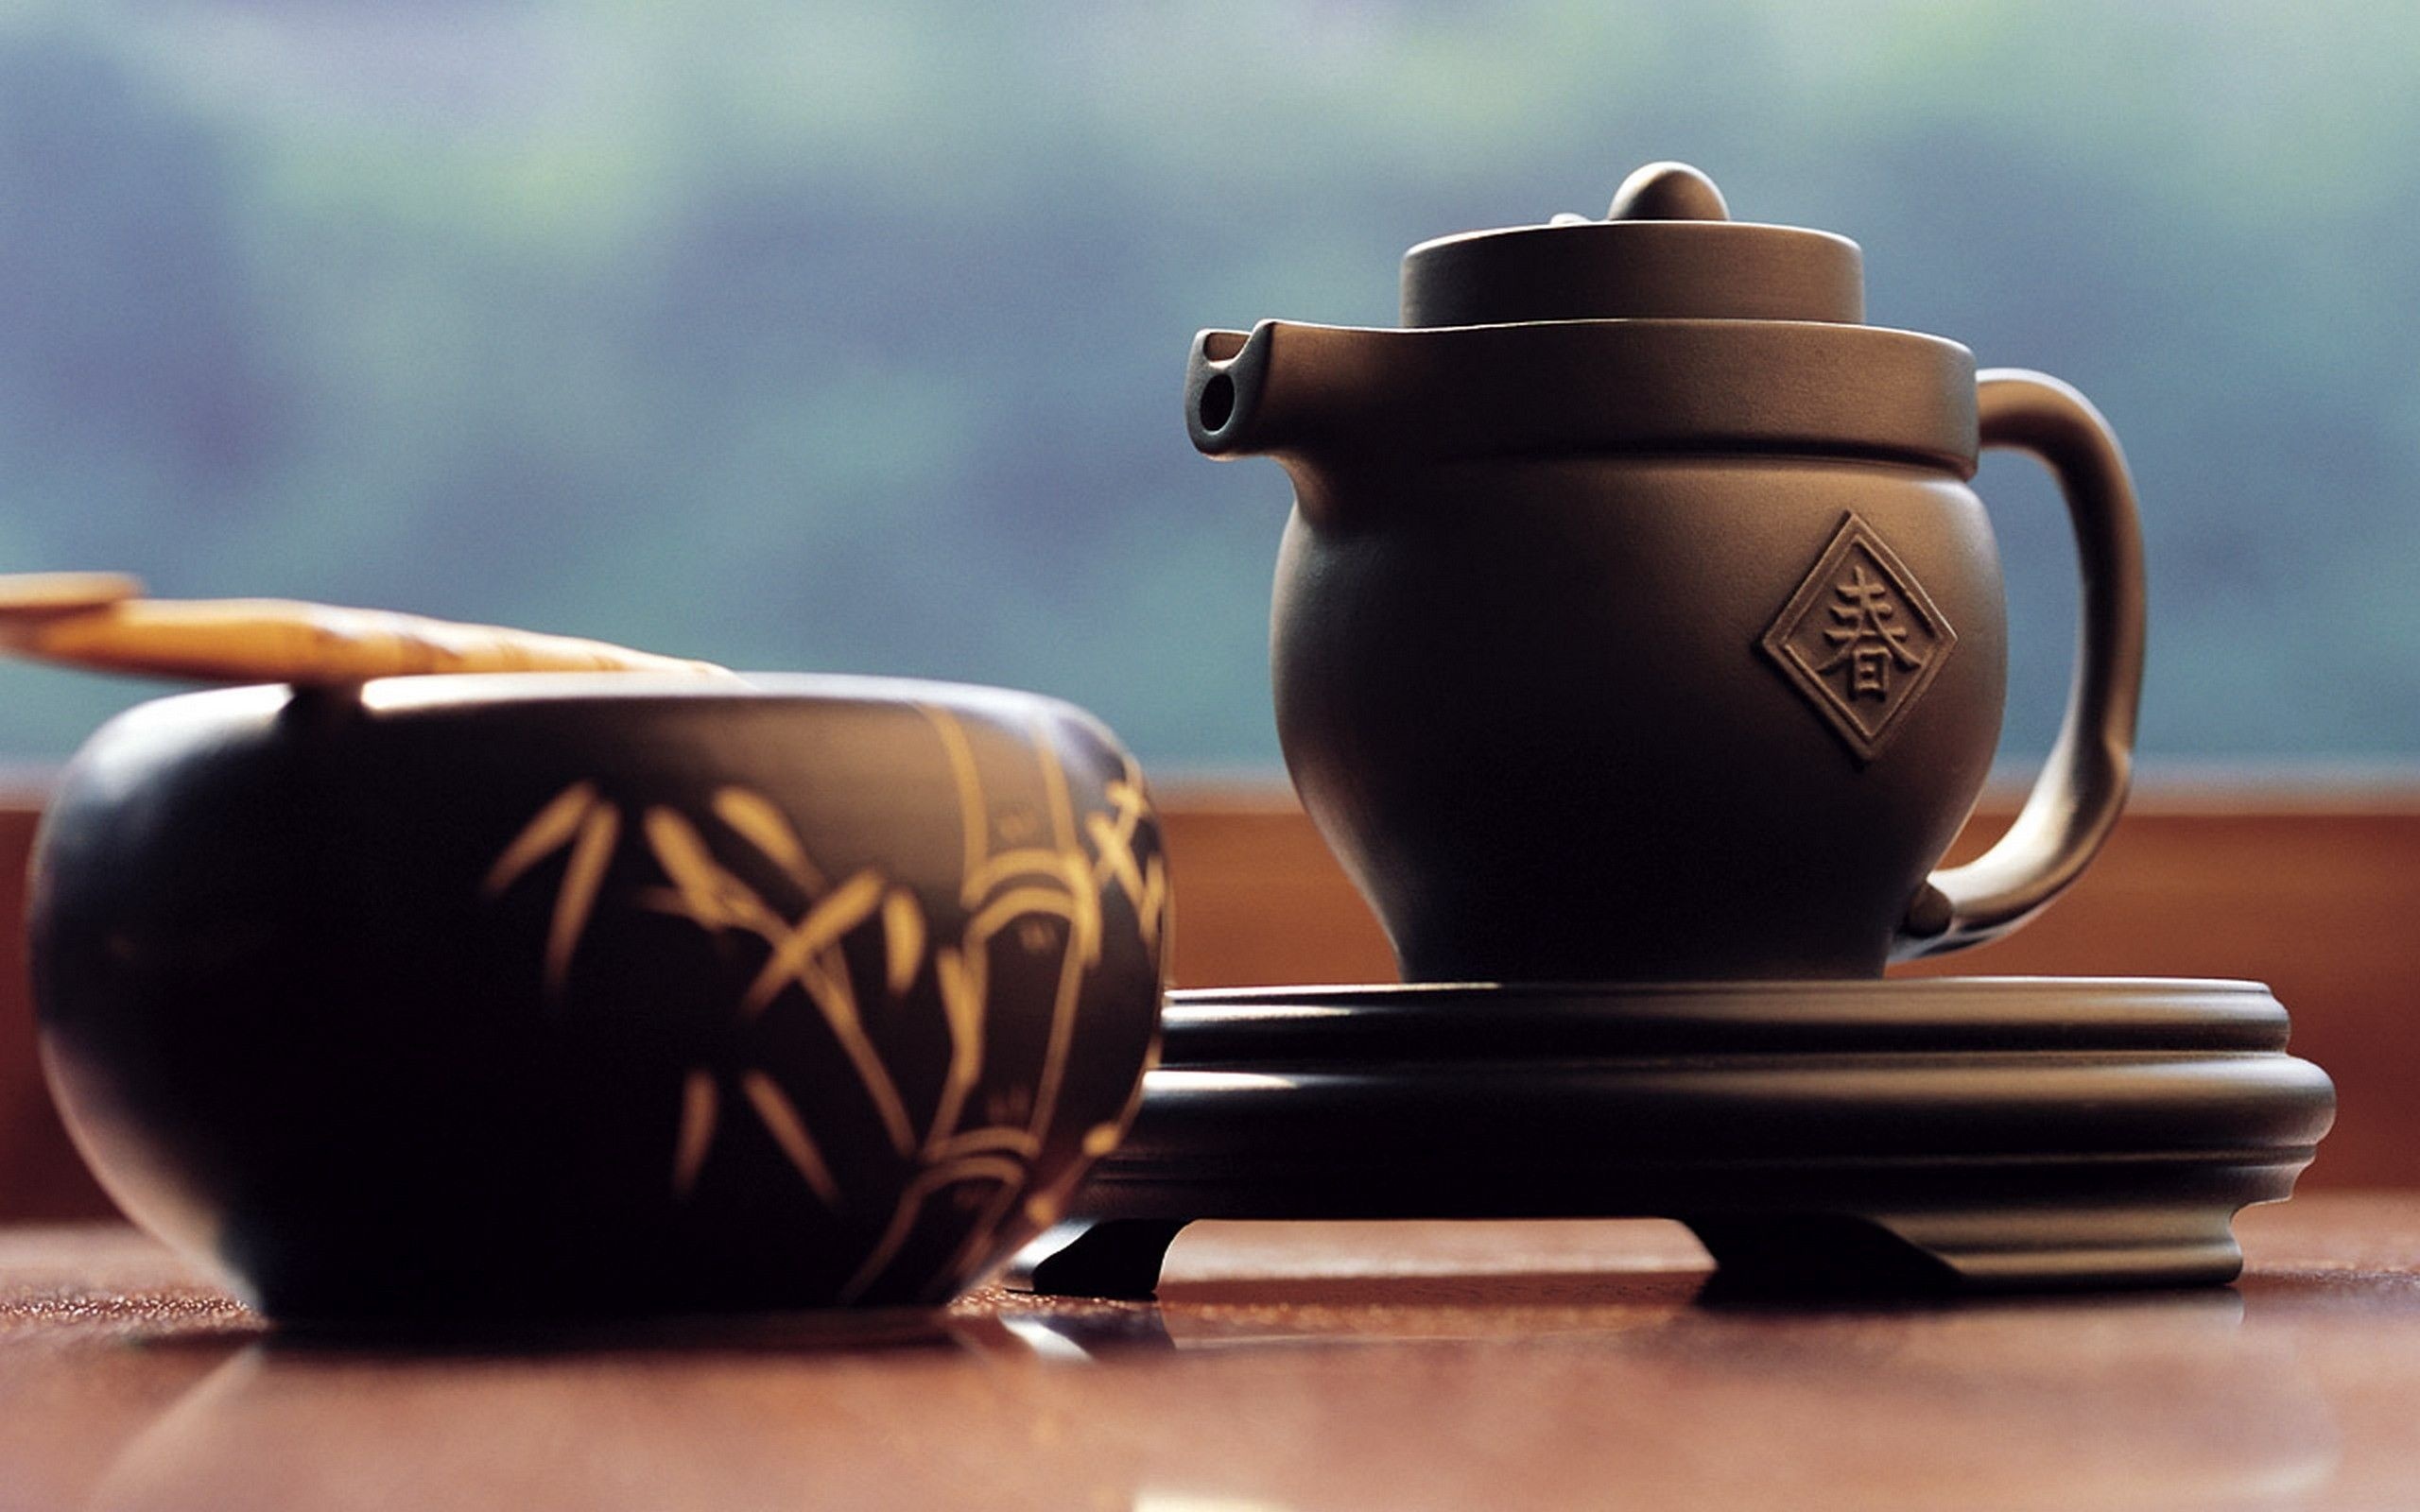 Tea: A popular Asian drink brewed from the leaves of the Camellia Sinensis plant. 2560x1600 HD Wallpaper.